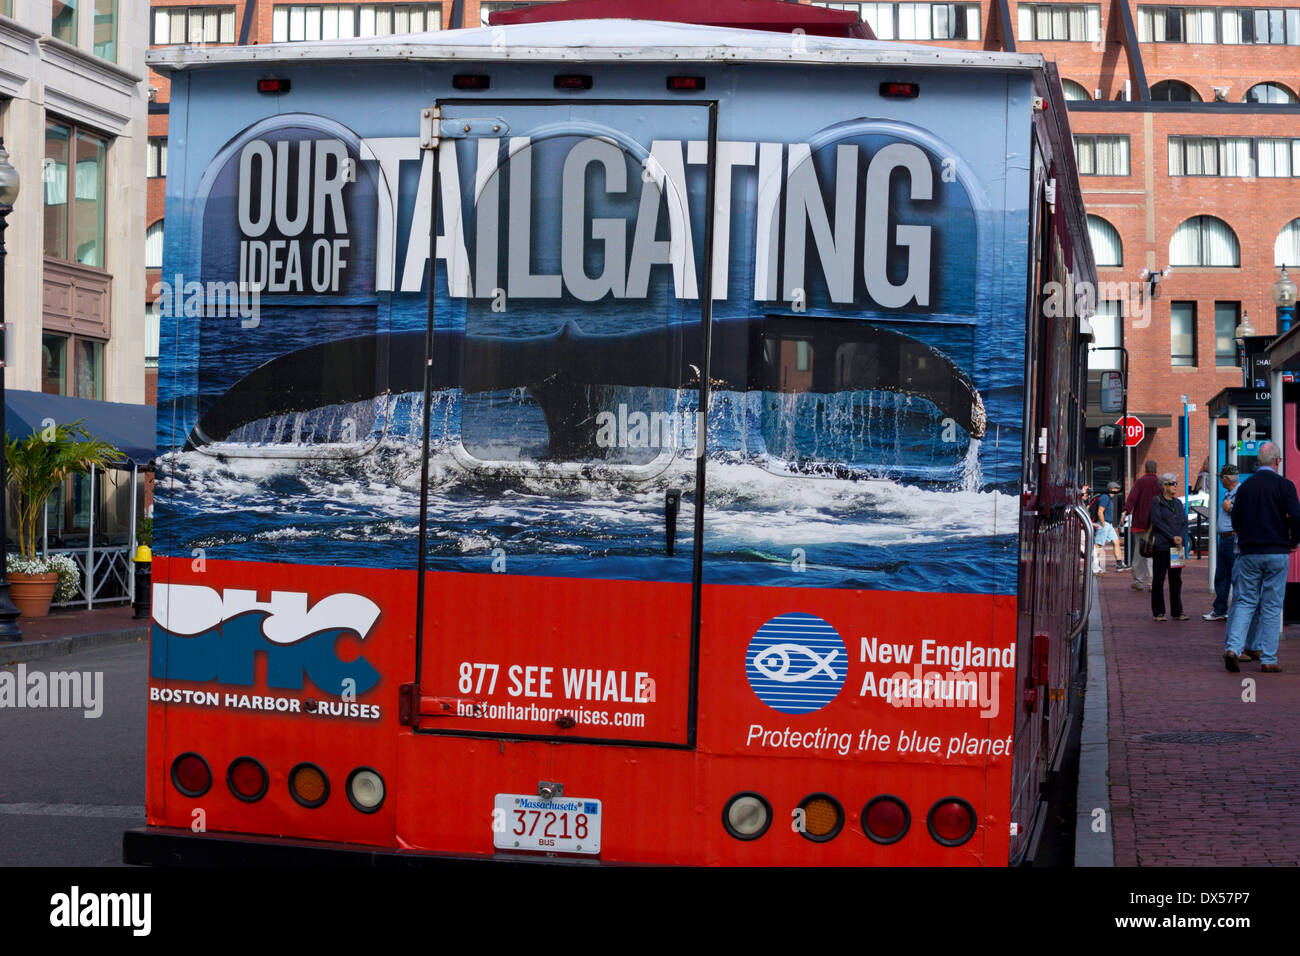 Advert on the back of a bus for the New England Aquarium, Boston, Massachusetts, USA Stock Photo